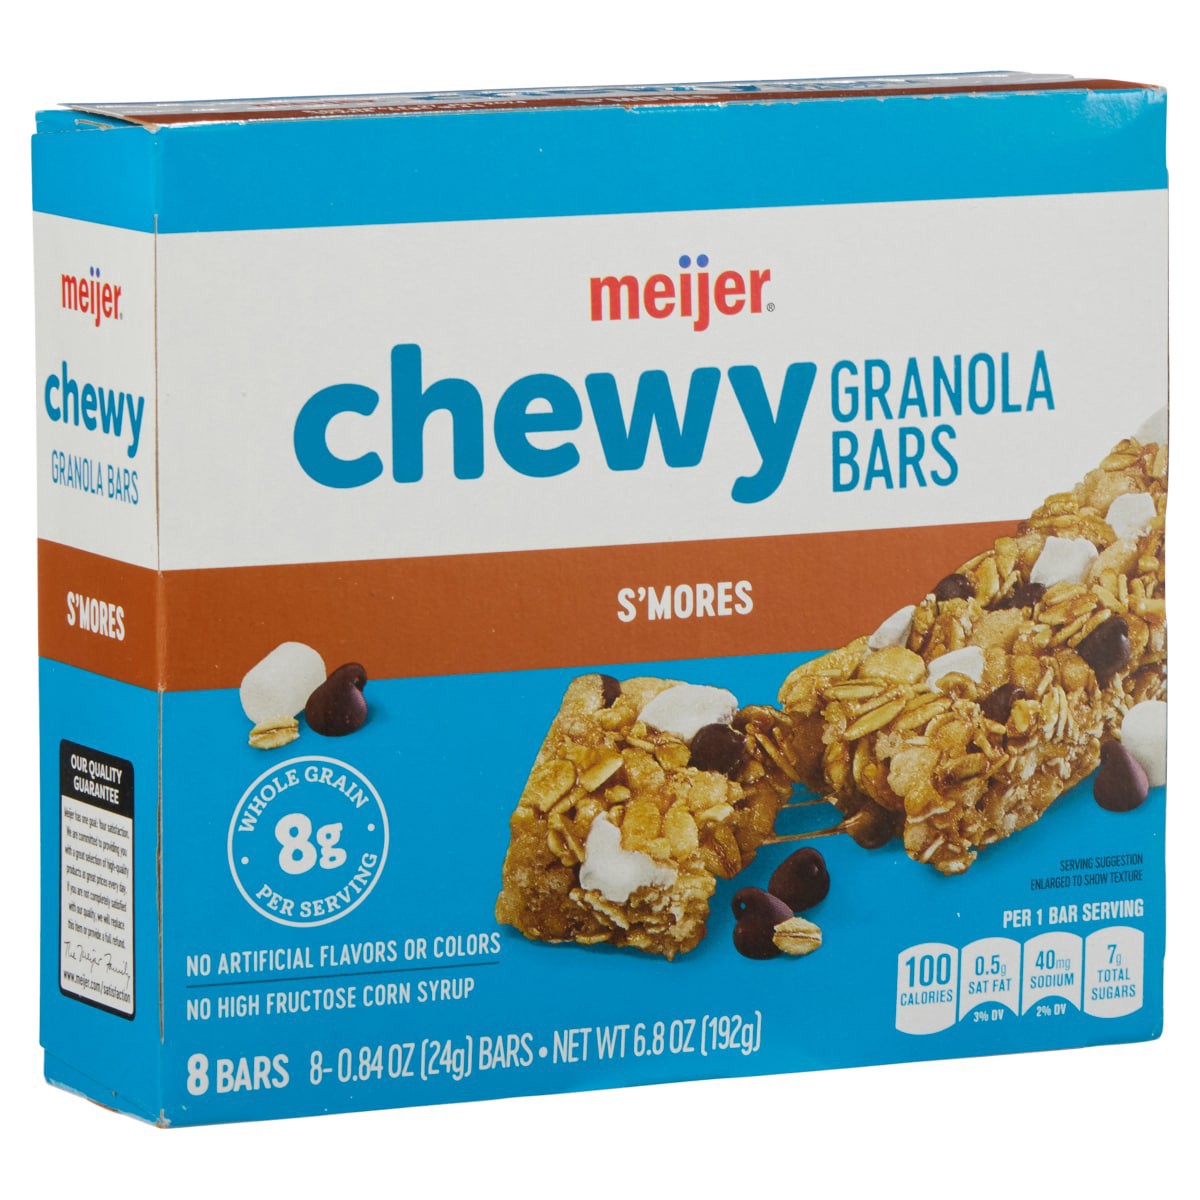 slide 5 of 29, Meijer Chewy Granola Bar, S'mores, 6.77 oz, 8 ct